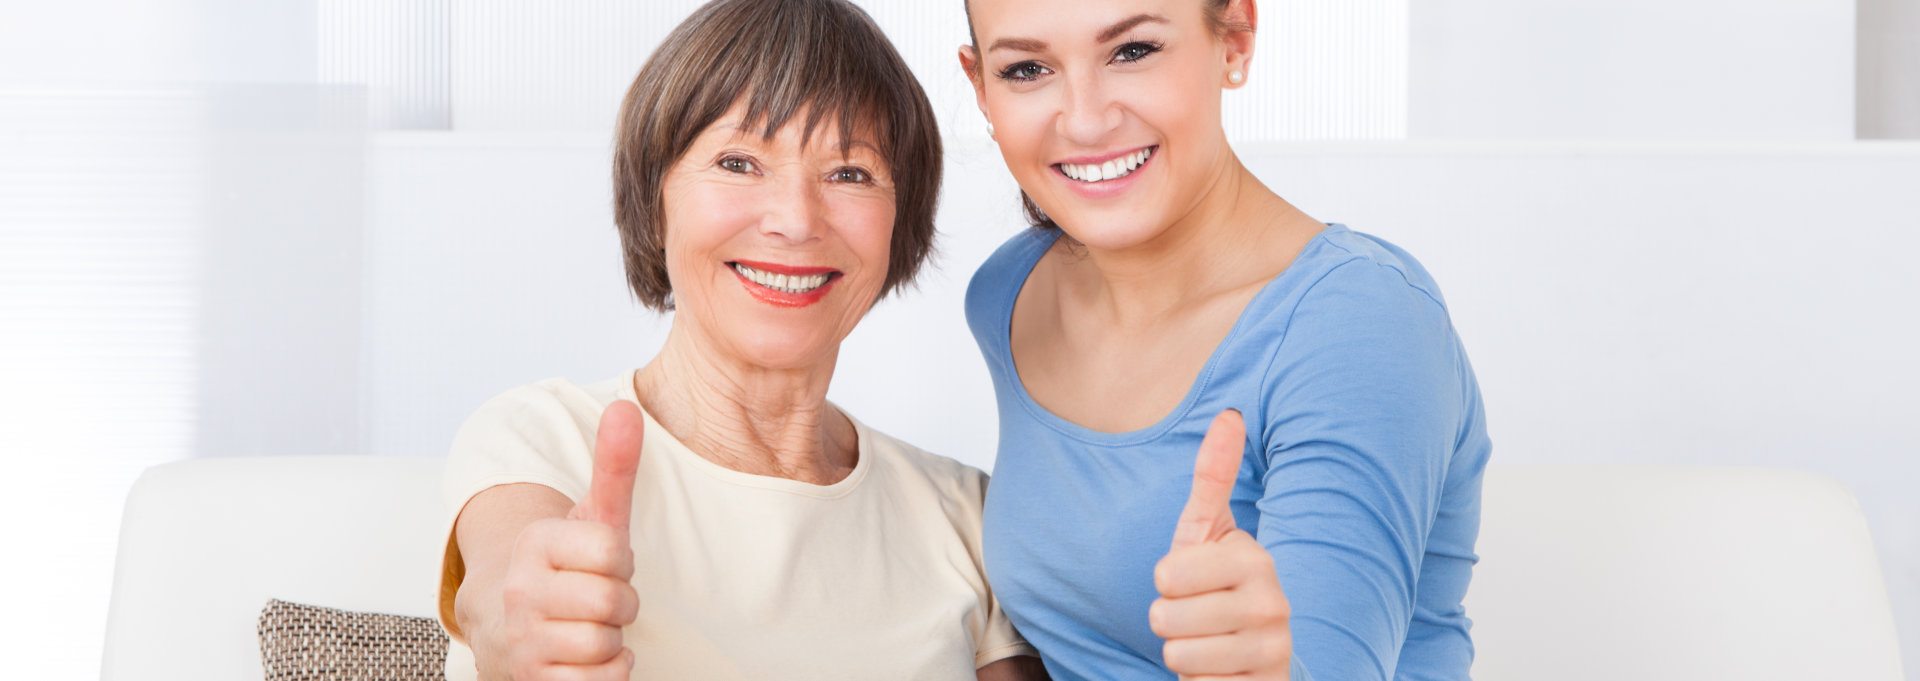 young woman and elderly woman thumbs up